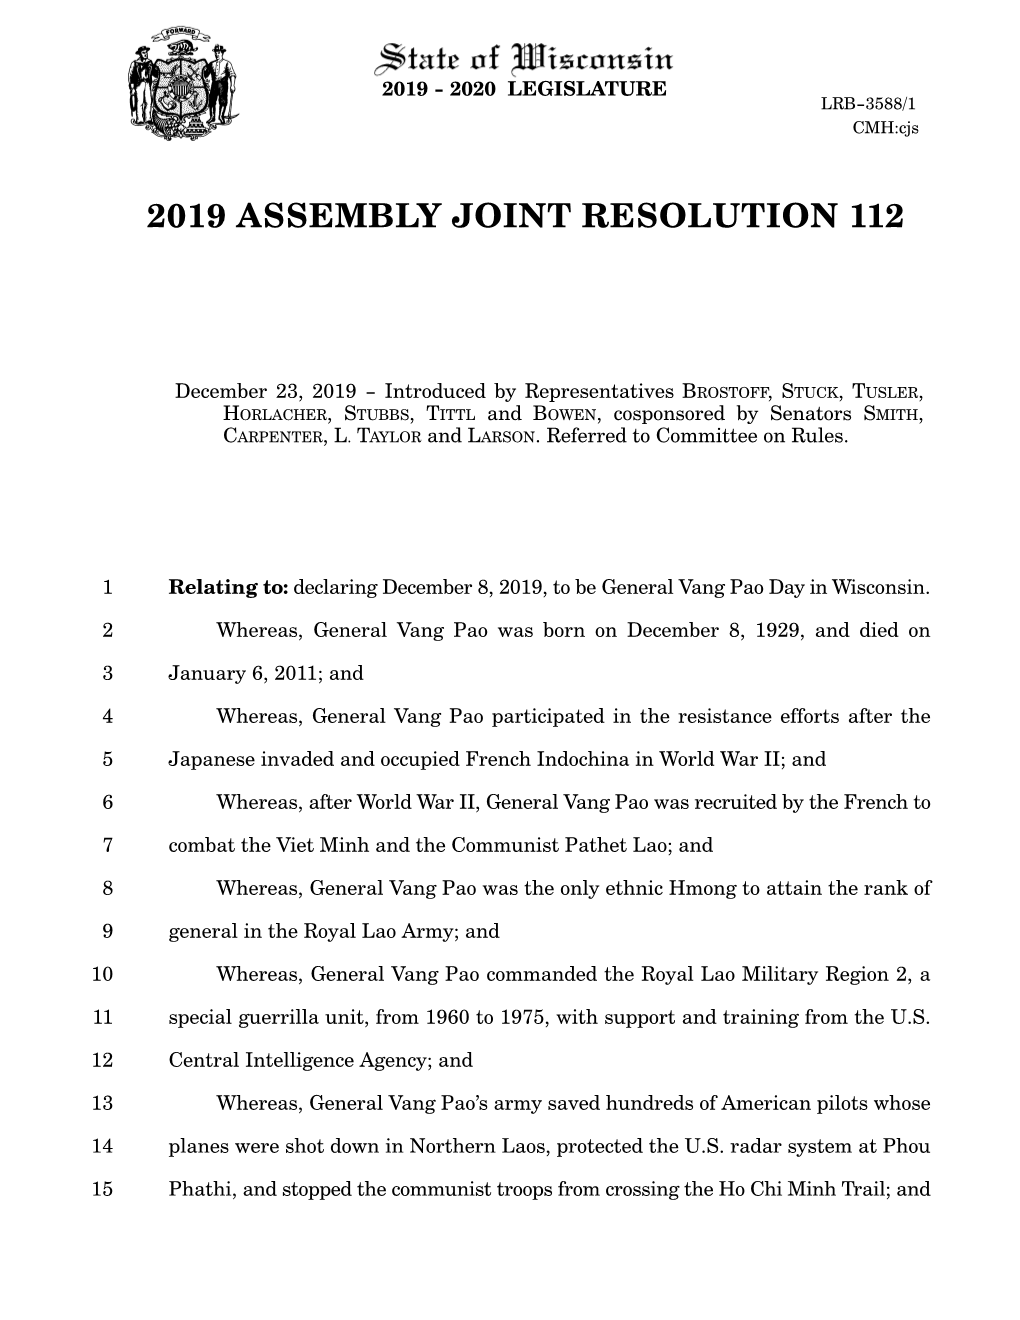 2019 Assembly Joint Resolution 112